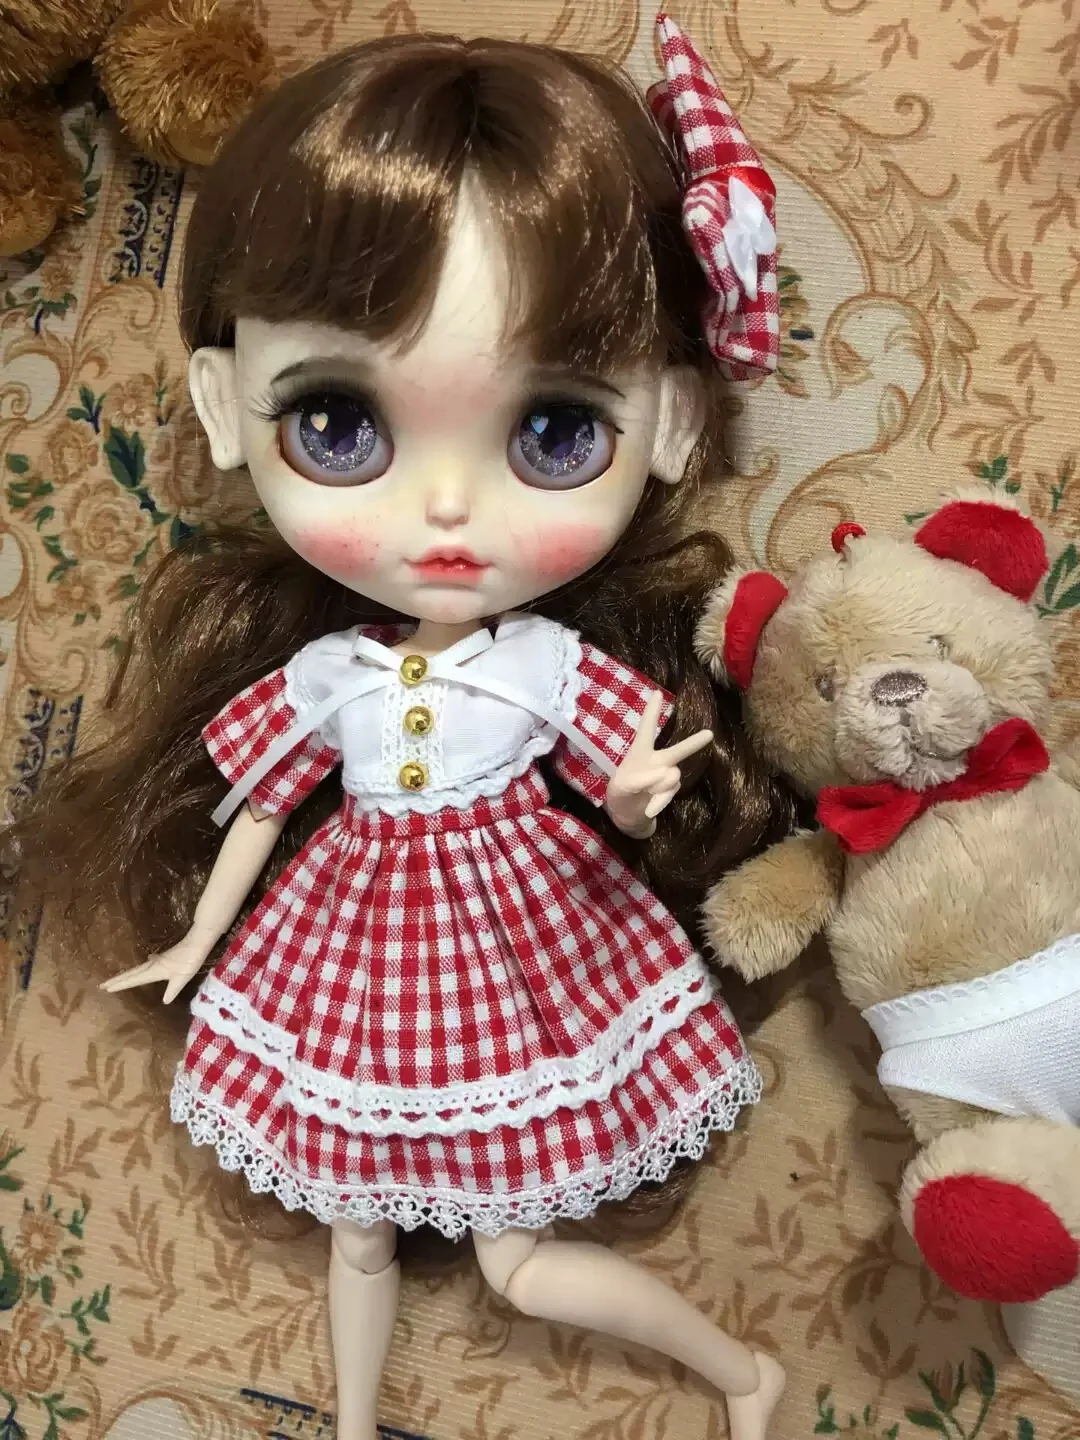 

Big sale Dula Doll Clothes Dress Red checkered skirt Blythe Qbaby ob24 ob22 Azone Licca ICY JerryB 1/6 Bjd Doll Accessories